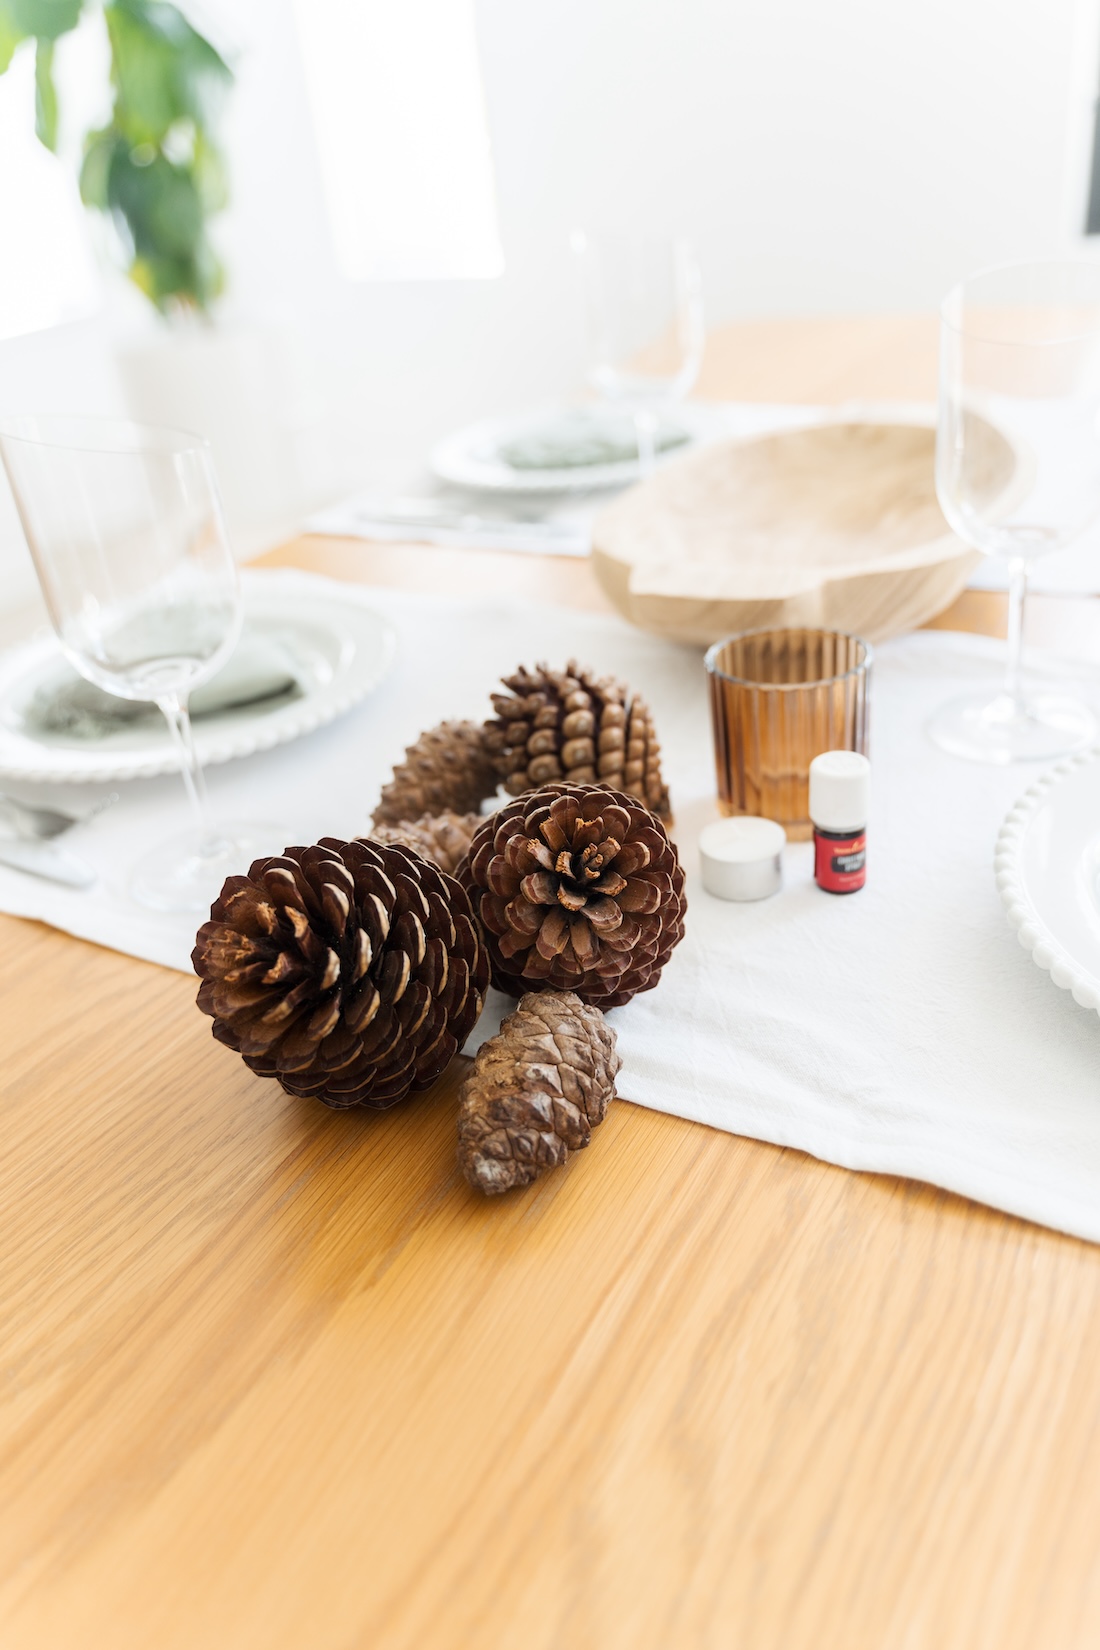 Items you will need to make Christmas scented pinecone centrepiece